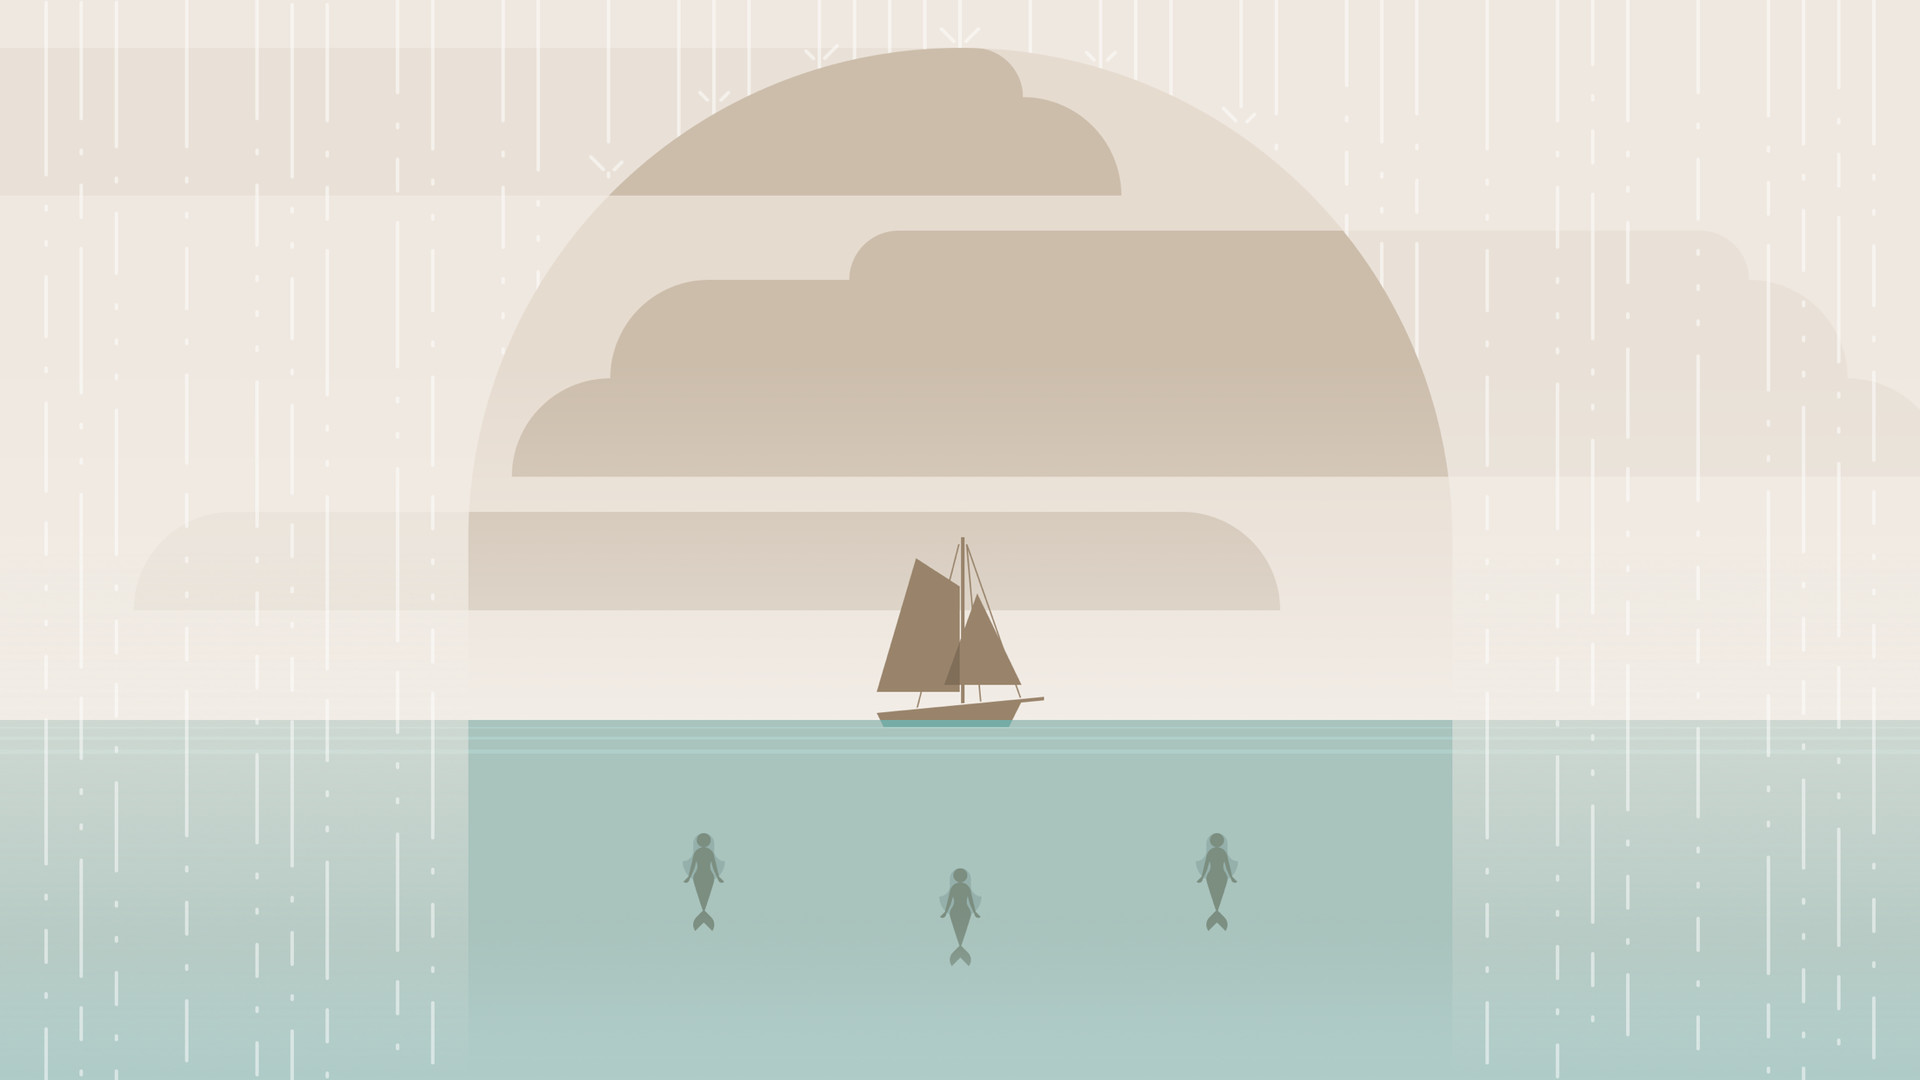 Burly Men At Sea Is A Small Game About Shipwrecks